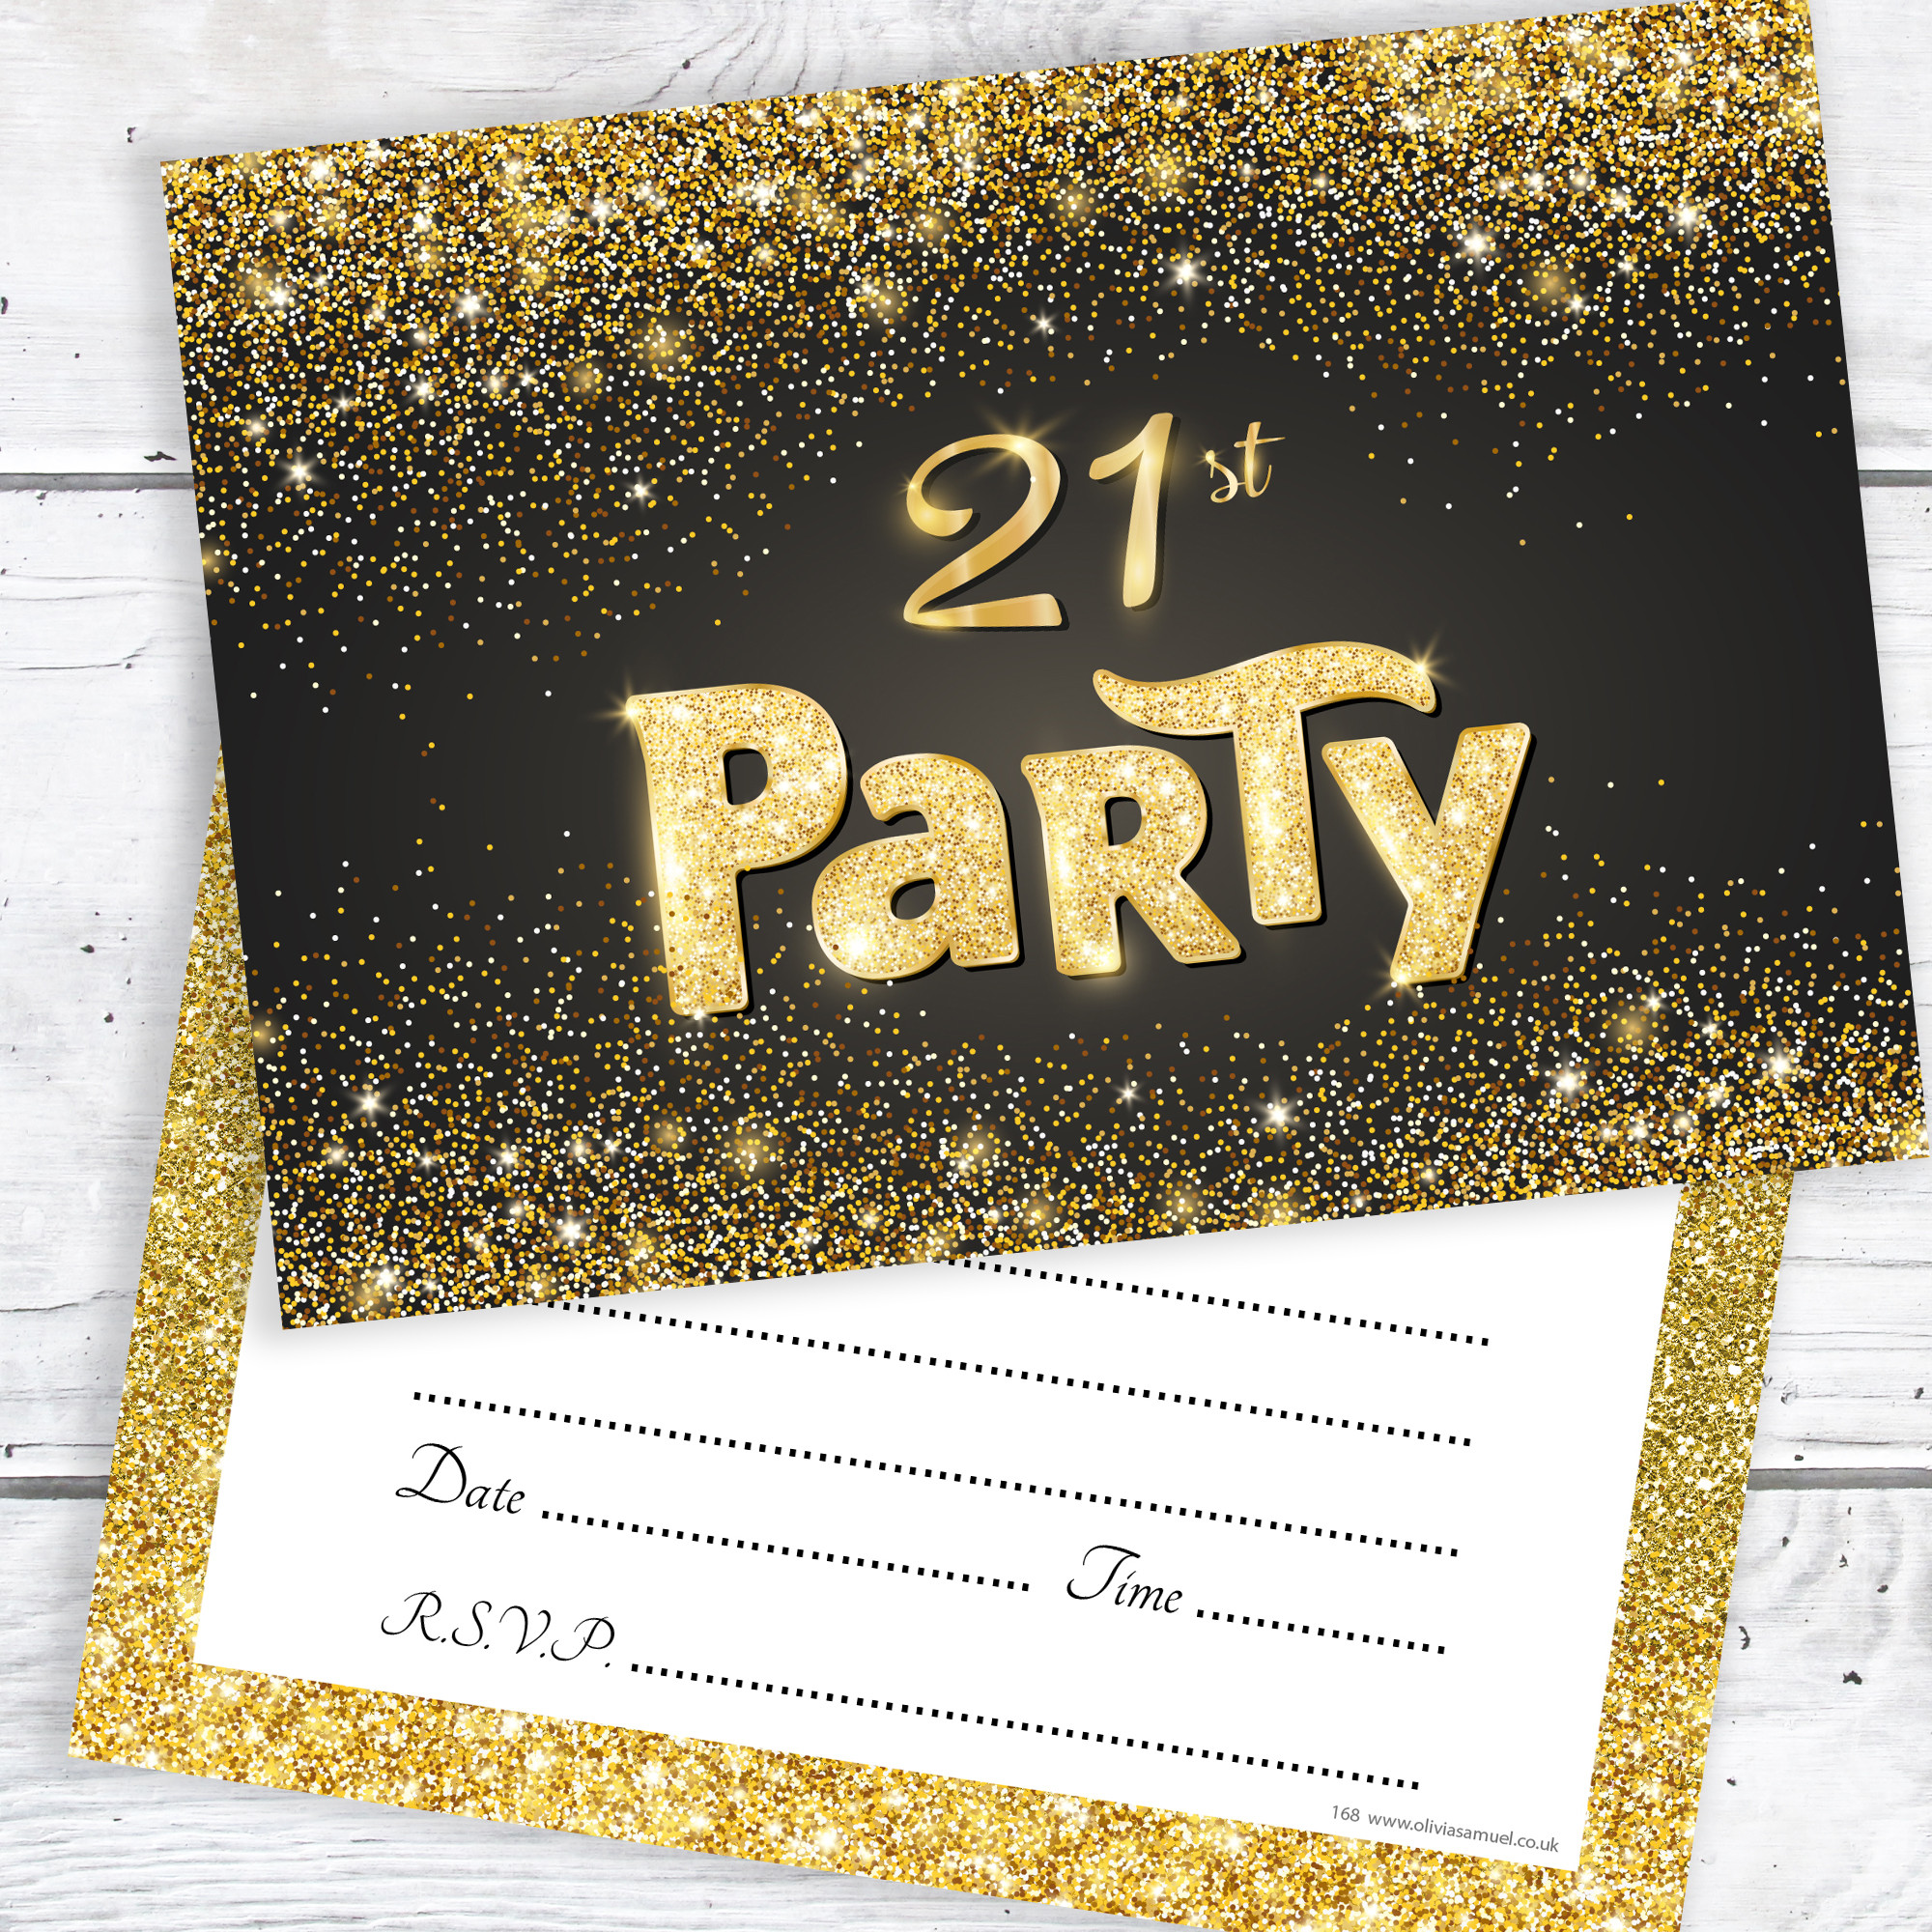 21st Birthday Party Invitations
 Black and Gold Effect 21st Birthday Party Invitations